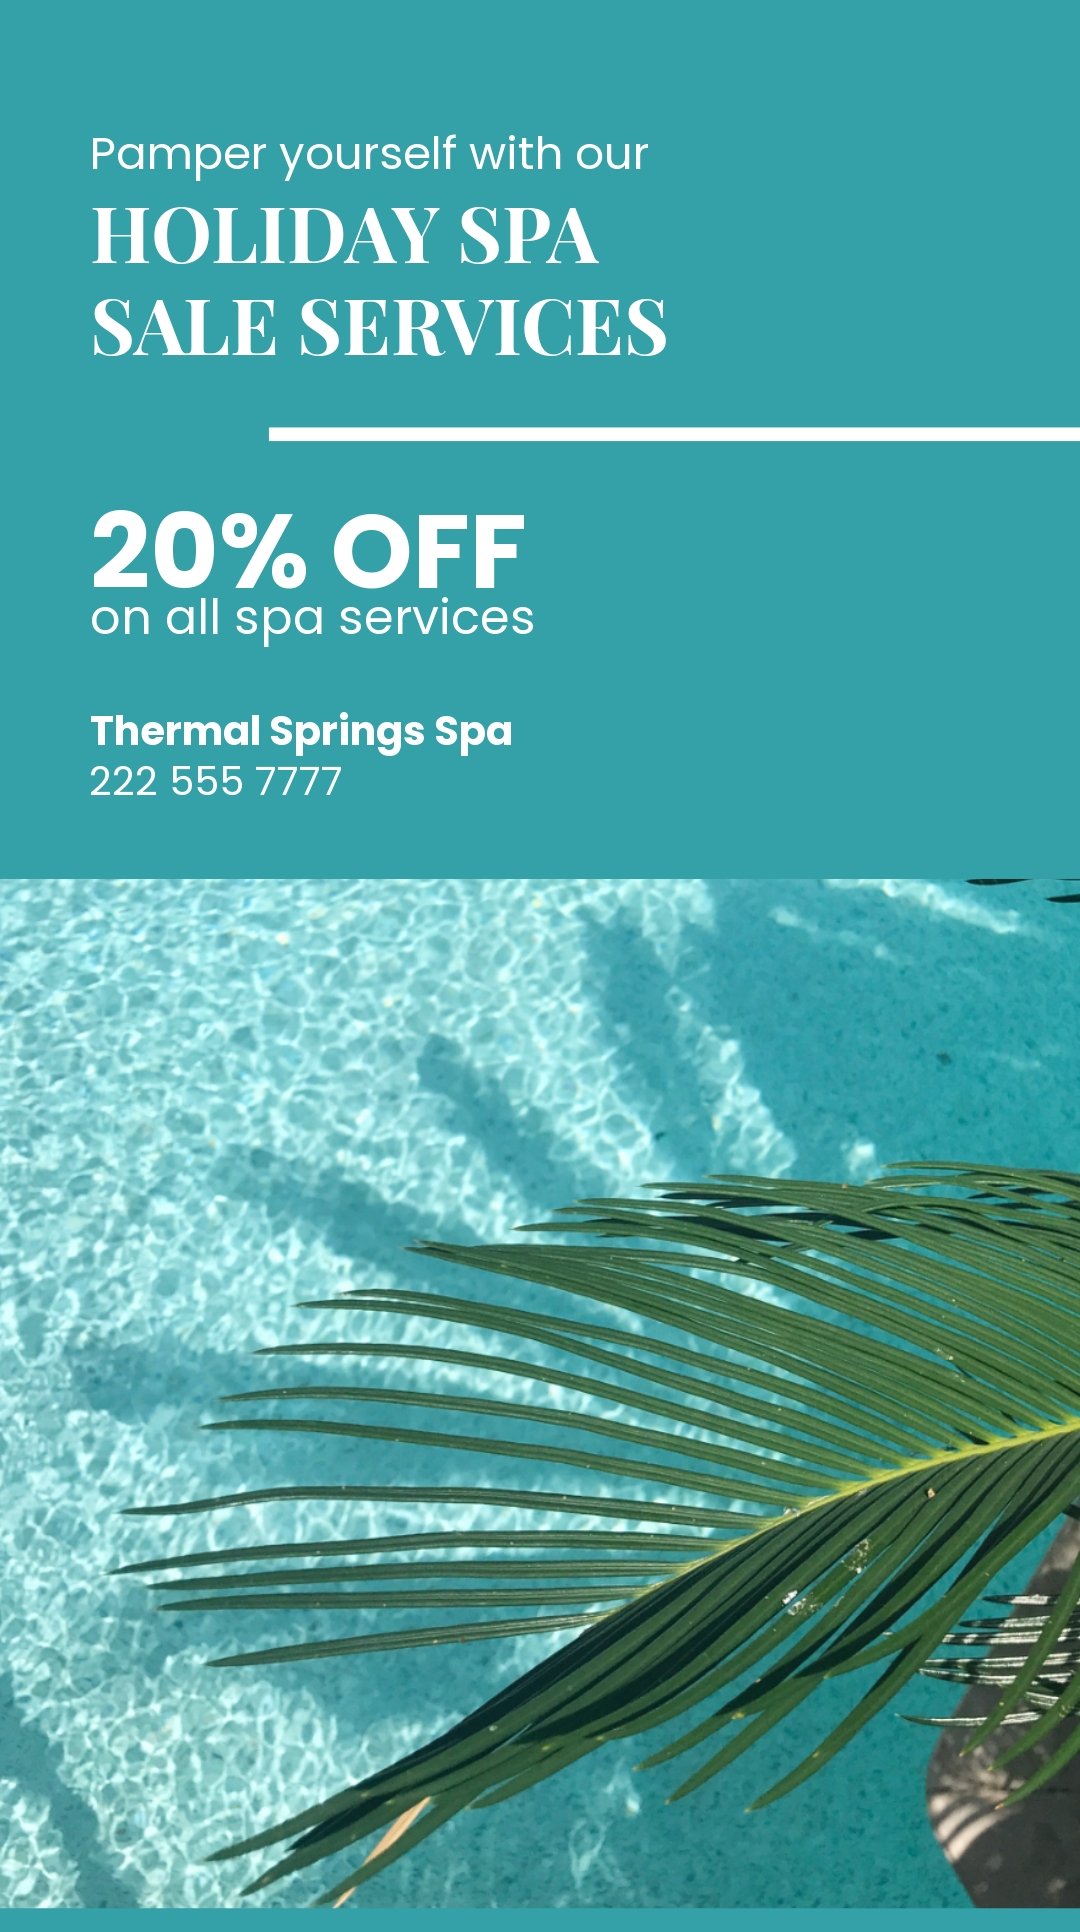 Free Spa Holiday Sale Whatsapp Post Template in Illustrator, PSD, PNG